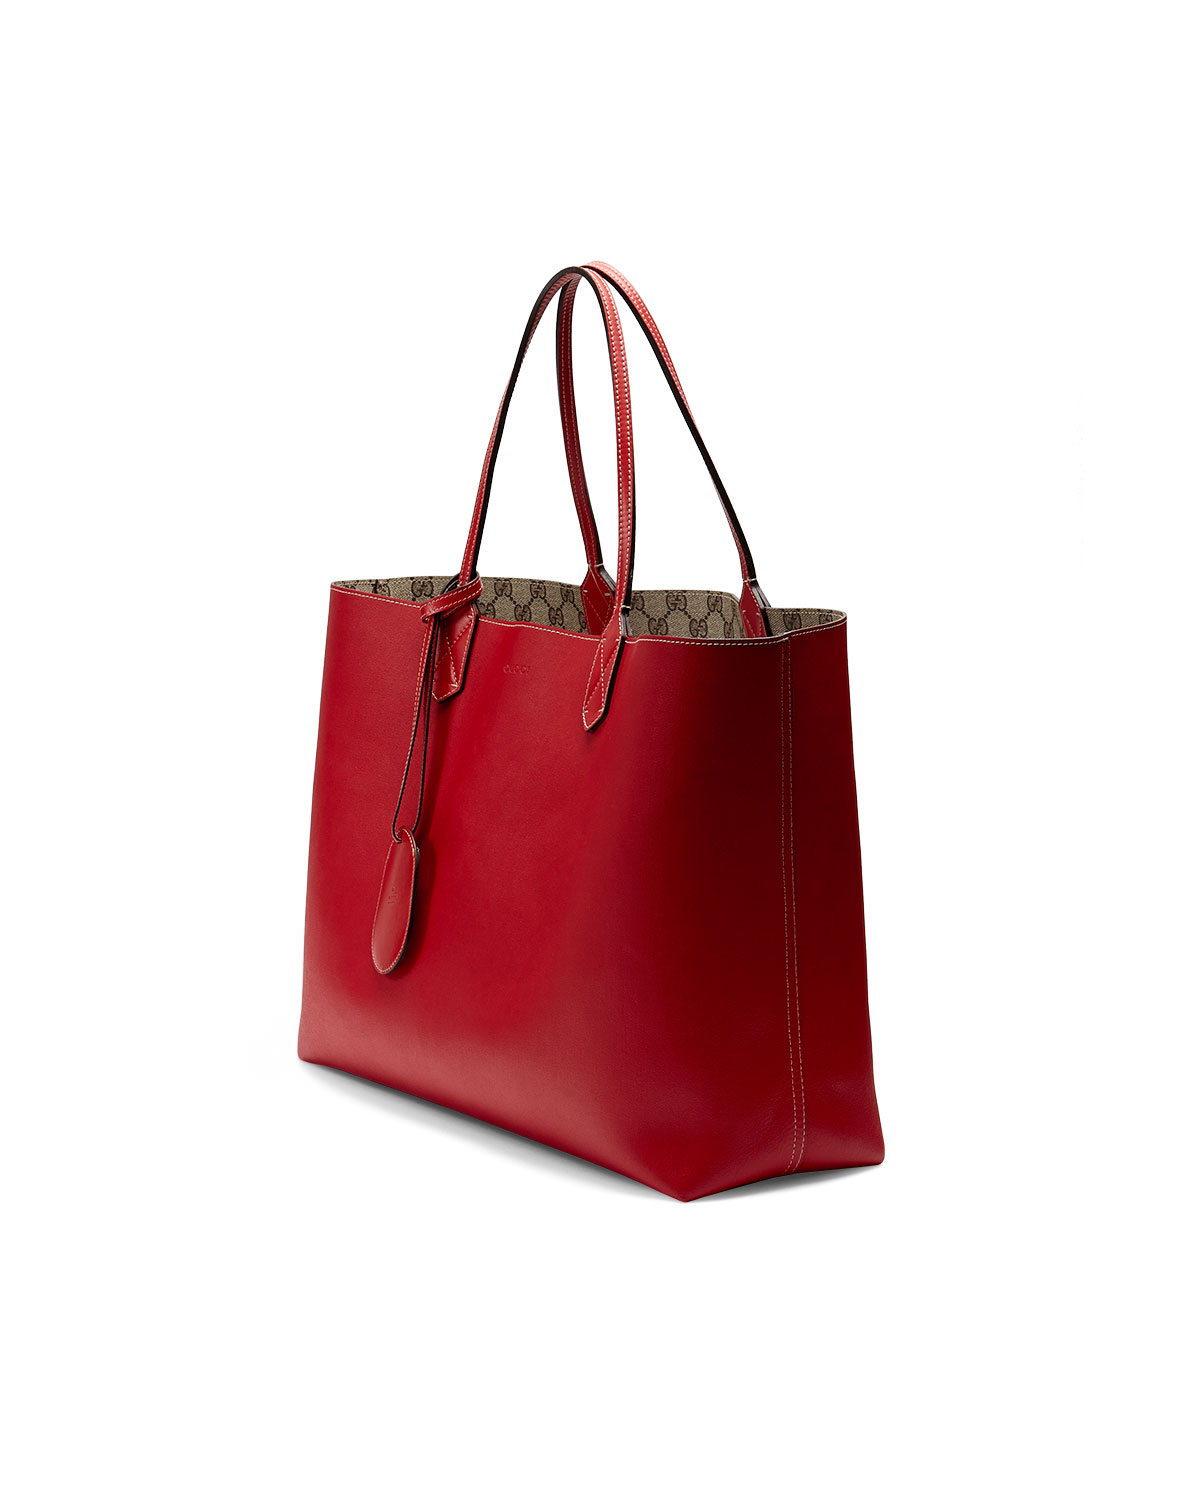 Gucci Reversible Gg Leather Tote in Brown (red) | Lyst